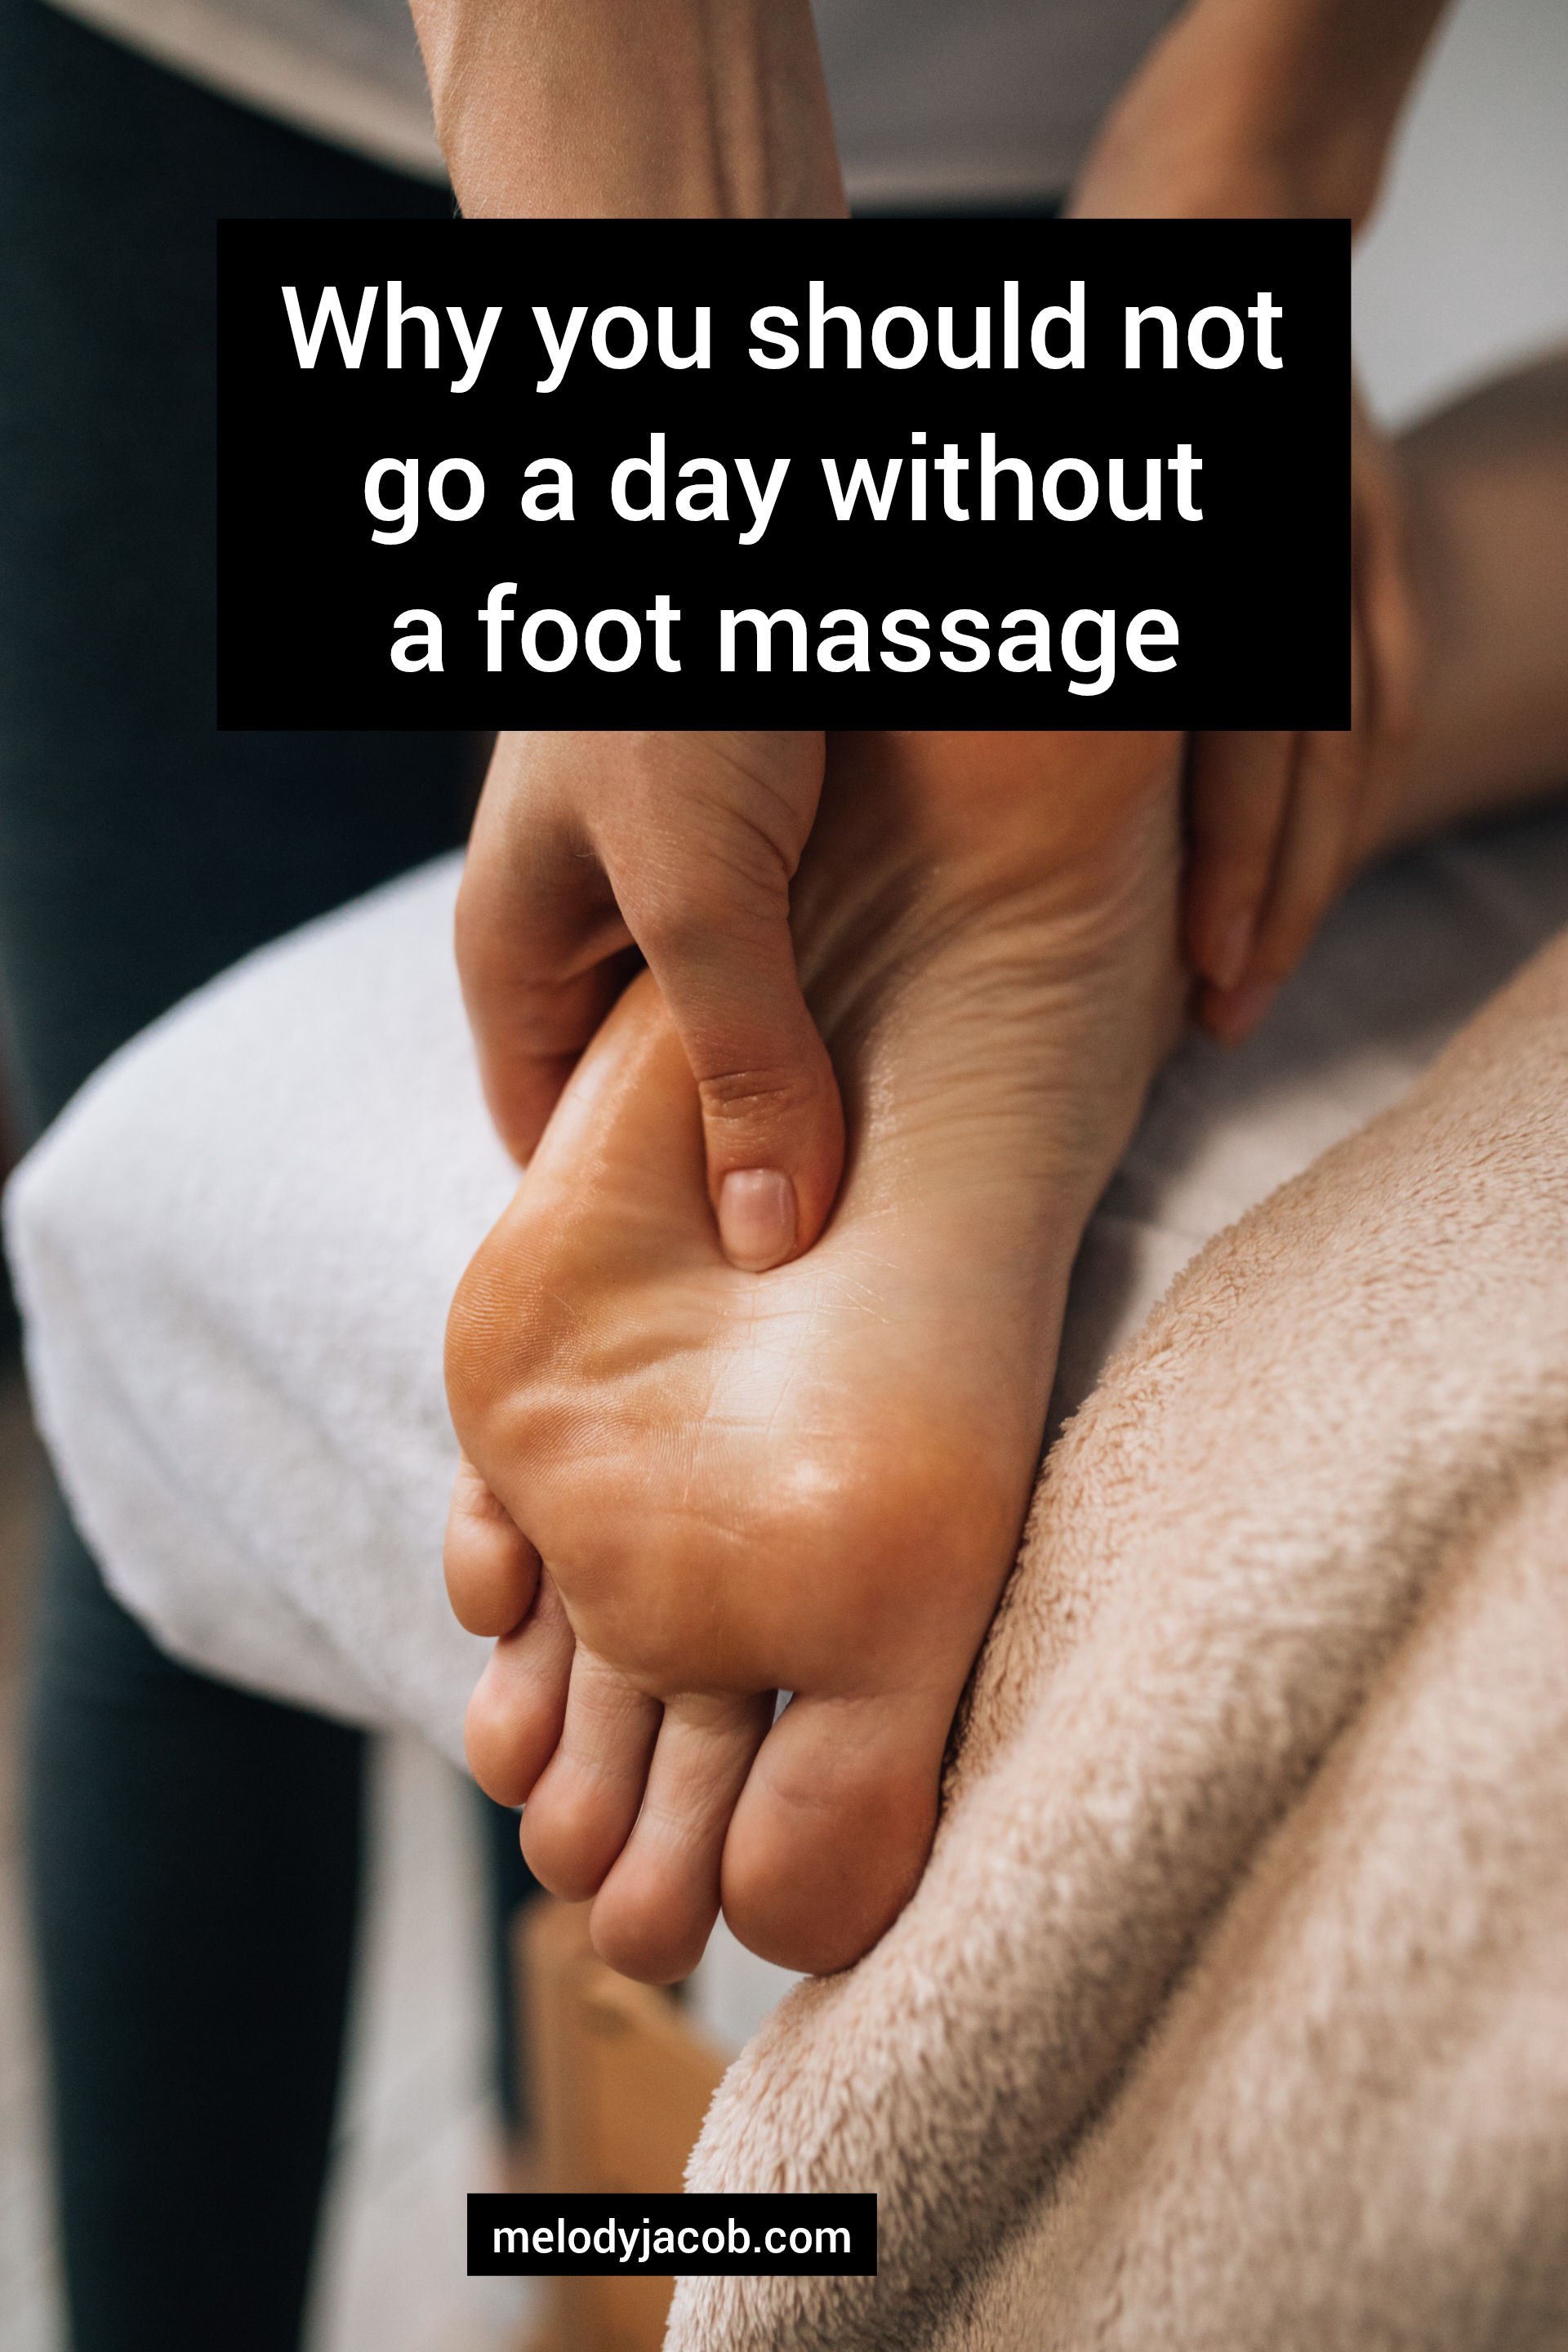 There are various health benefits of foot massage